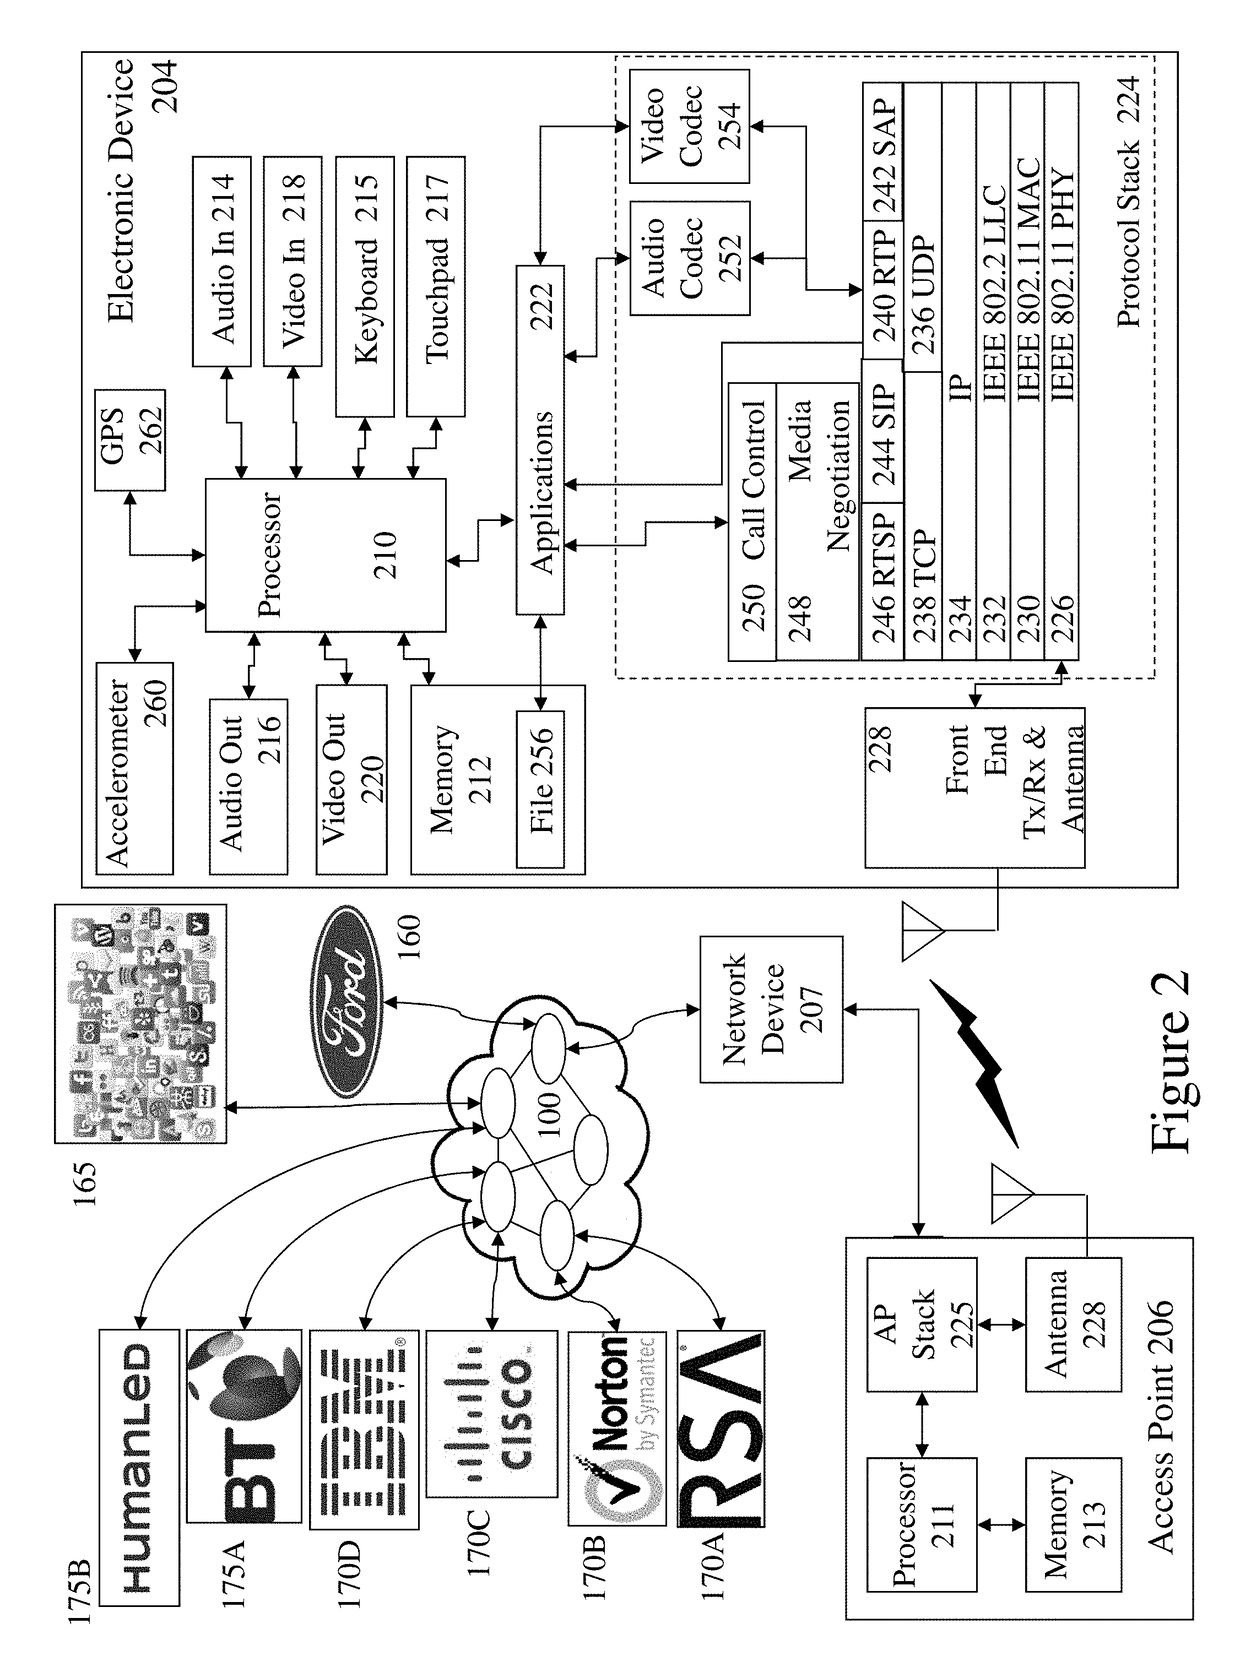 Security threat information gathering and incident reporting systems and methods